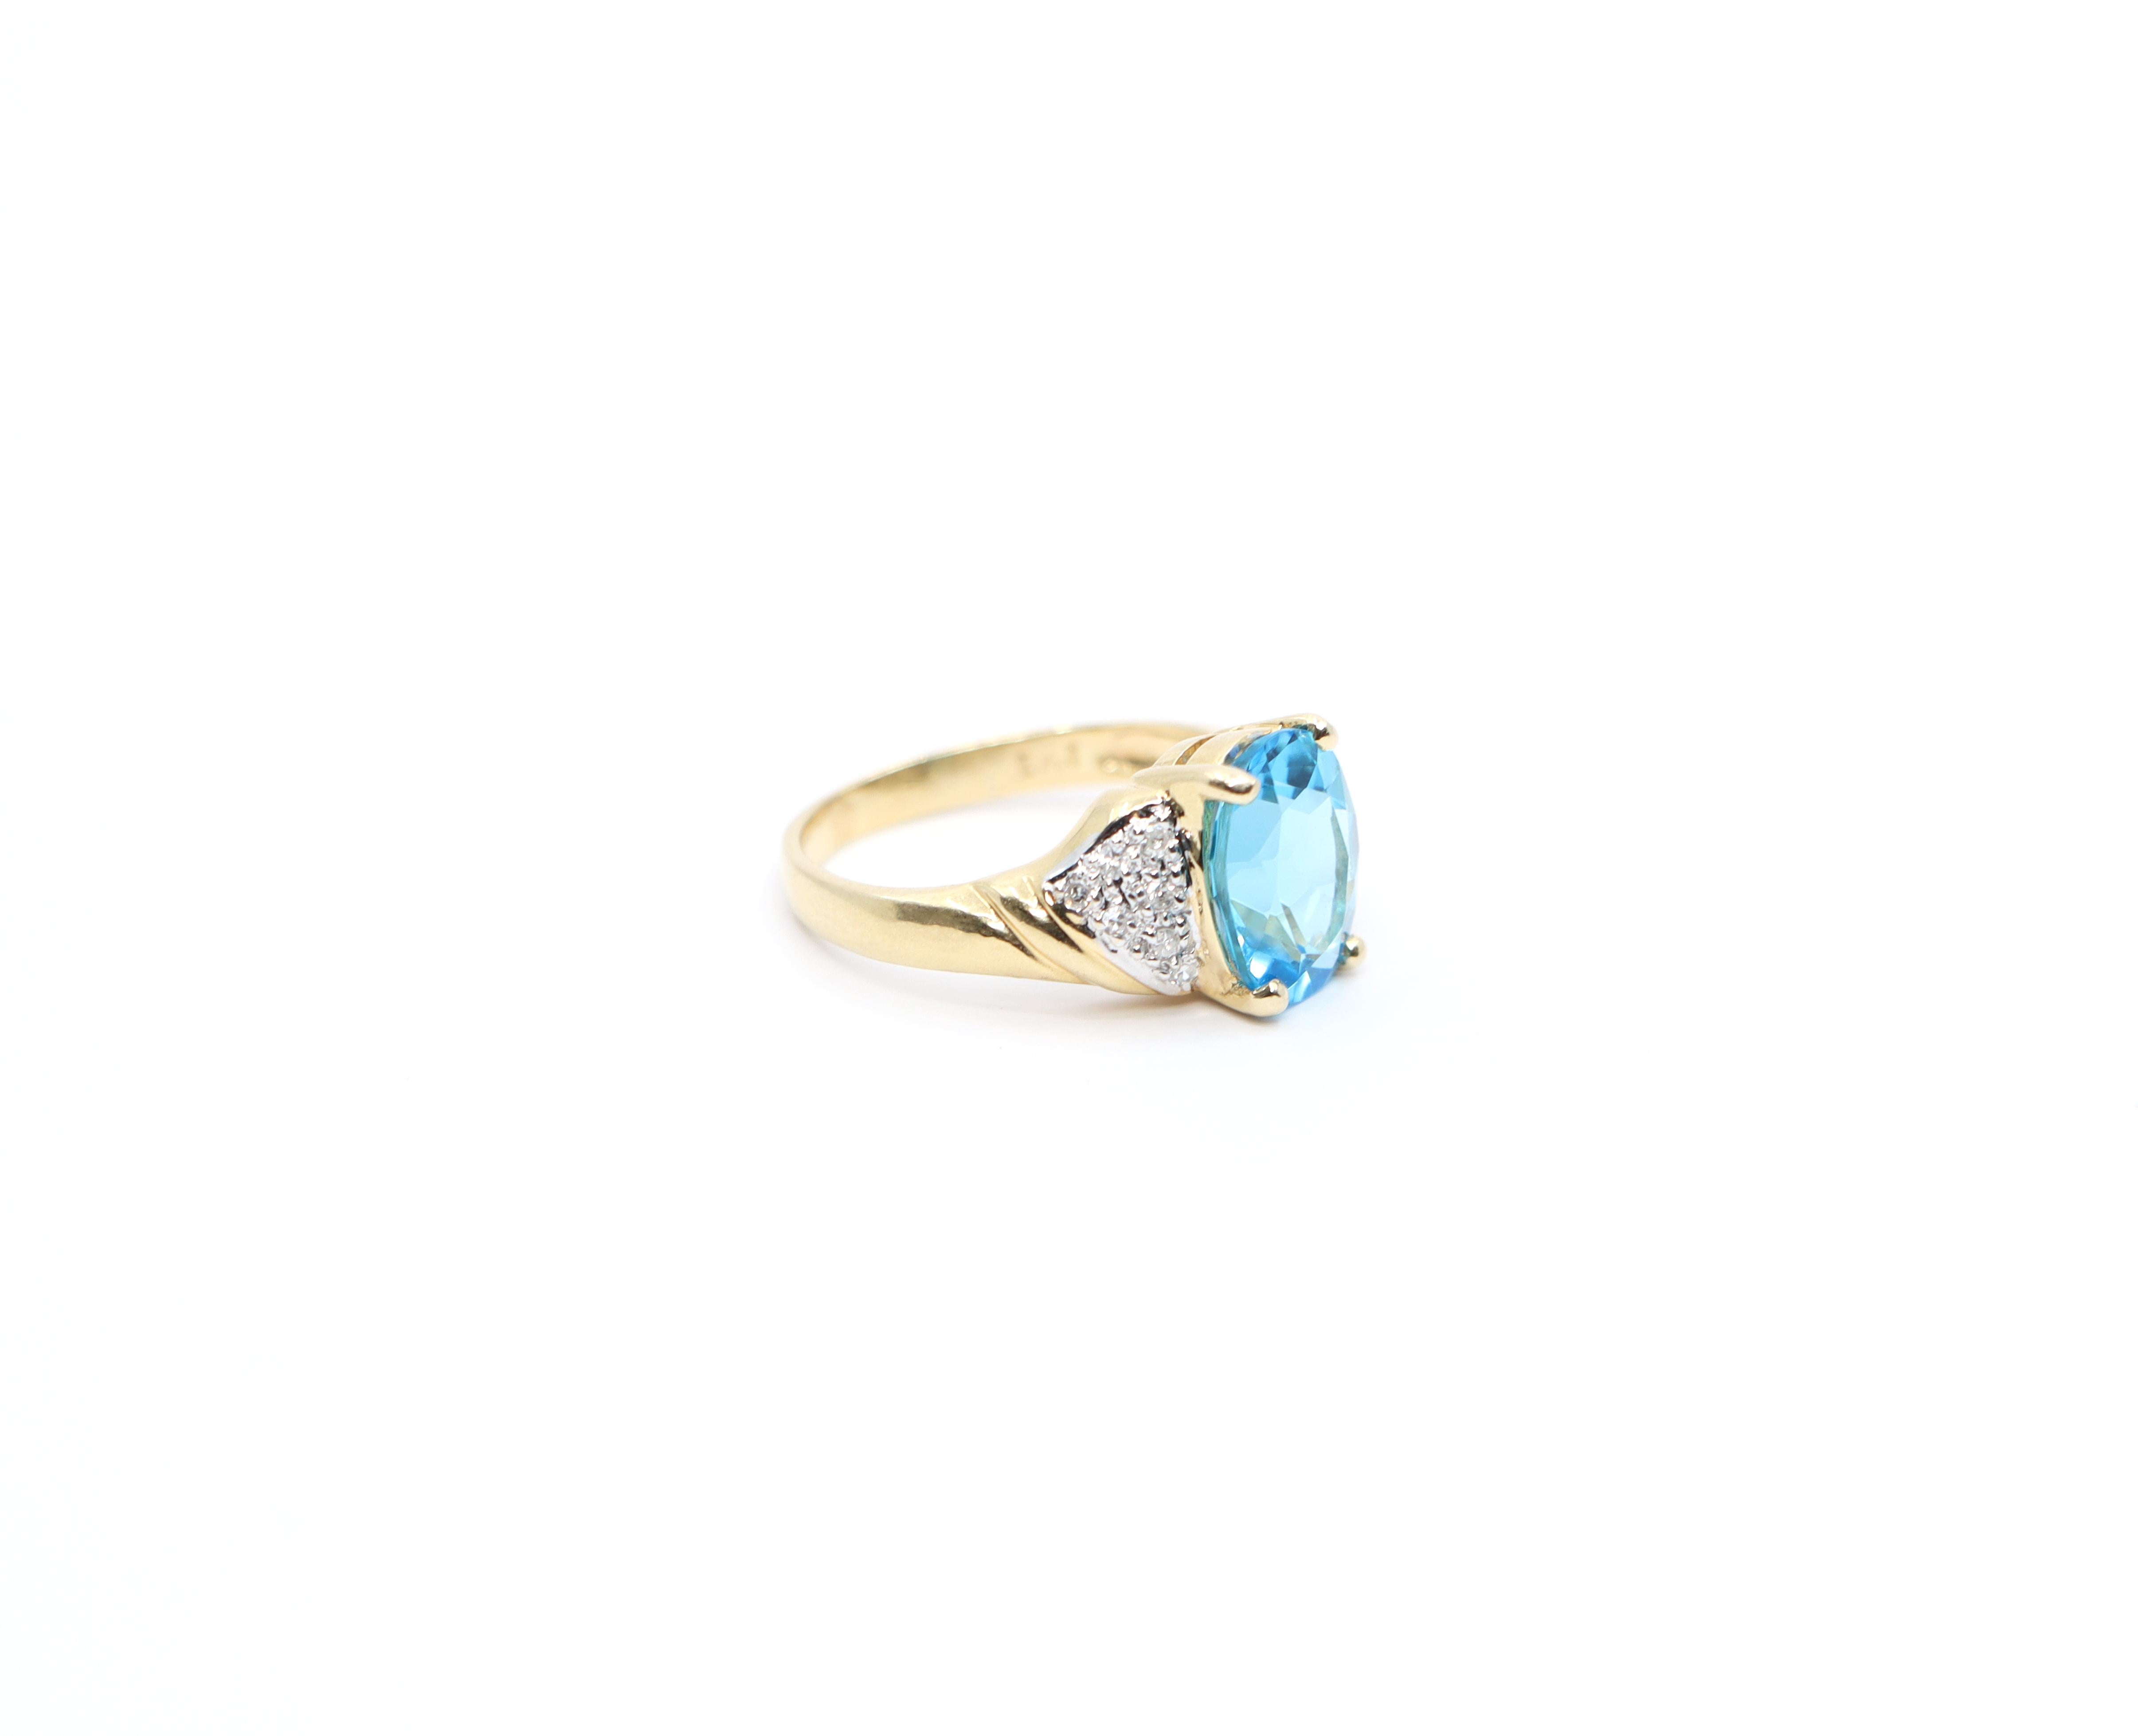 Gold Type:
14k Yellow Gold

Size:
4.75

Gemstone:
Oval cut 3.11 ct brilliant Blue Topaz, accented with 14 round brilliant cut shoulder Diamonds

Weight:
3.2g

Era:
Vintage

Condition:
Excellent Vintage Condition.  Minor signs of age-related